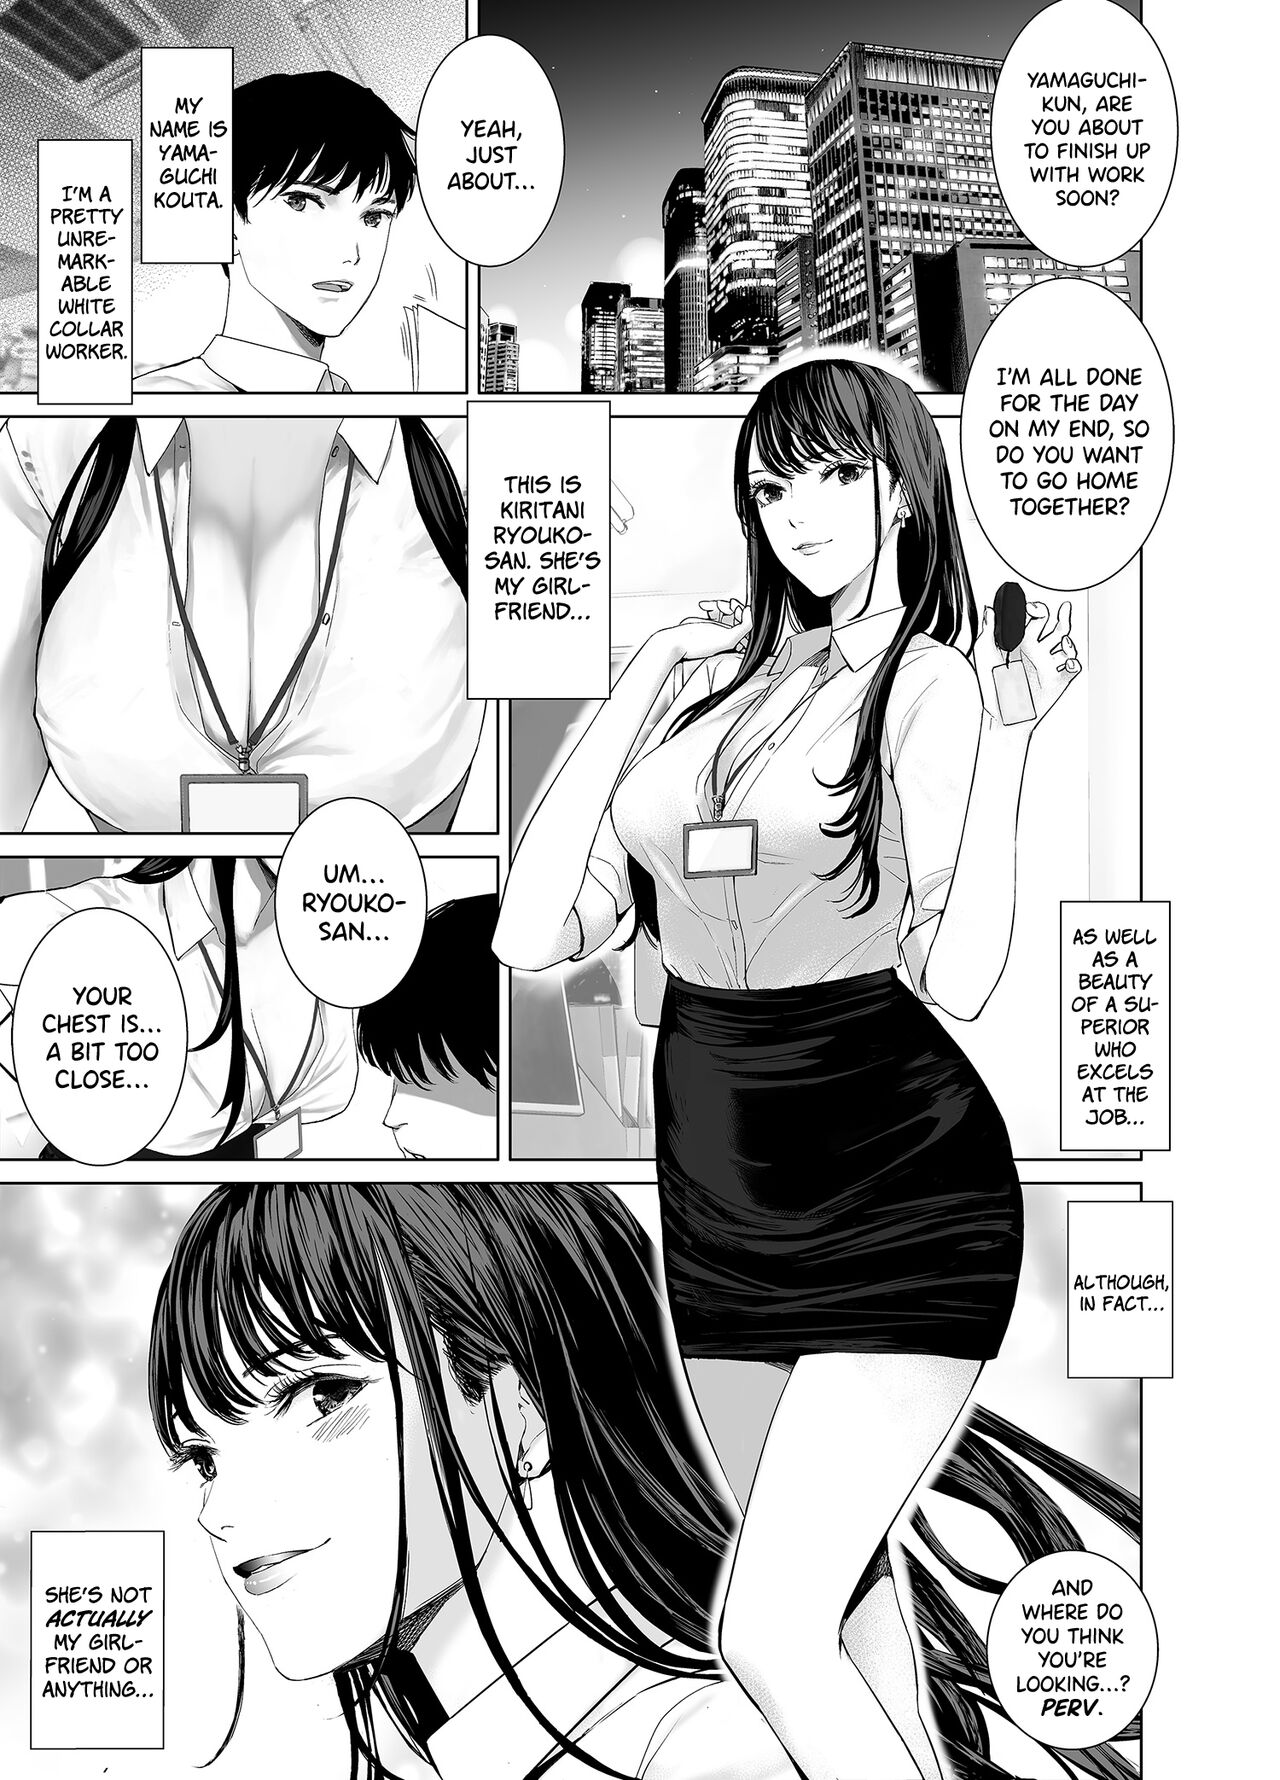 How a Dull Office Worker Became One with His Hottie Superior Shida Porn Comic pic pic